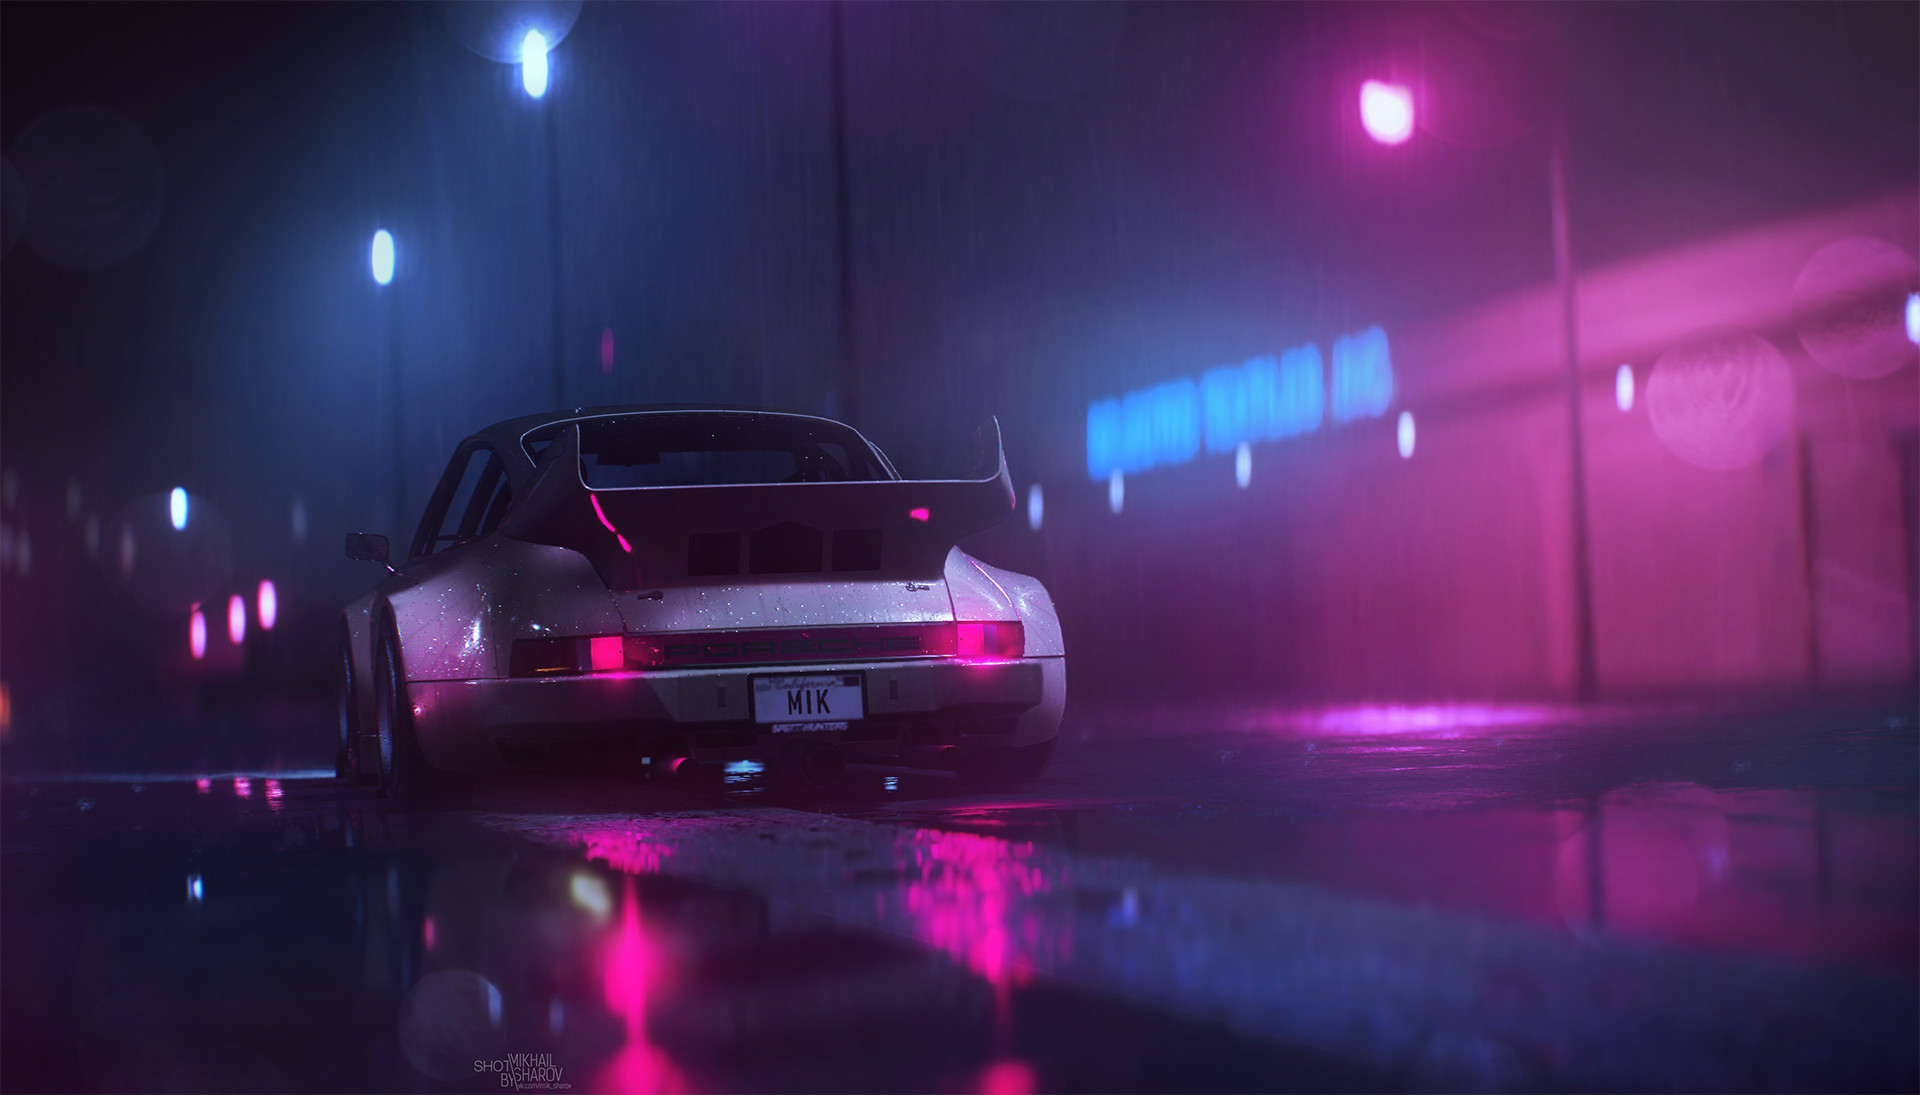 Need For Speed 2016 Need For Speed Video Games PC Gaming Car Rain Screen Shot Porsche Vehicle Pink 1920x1095